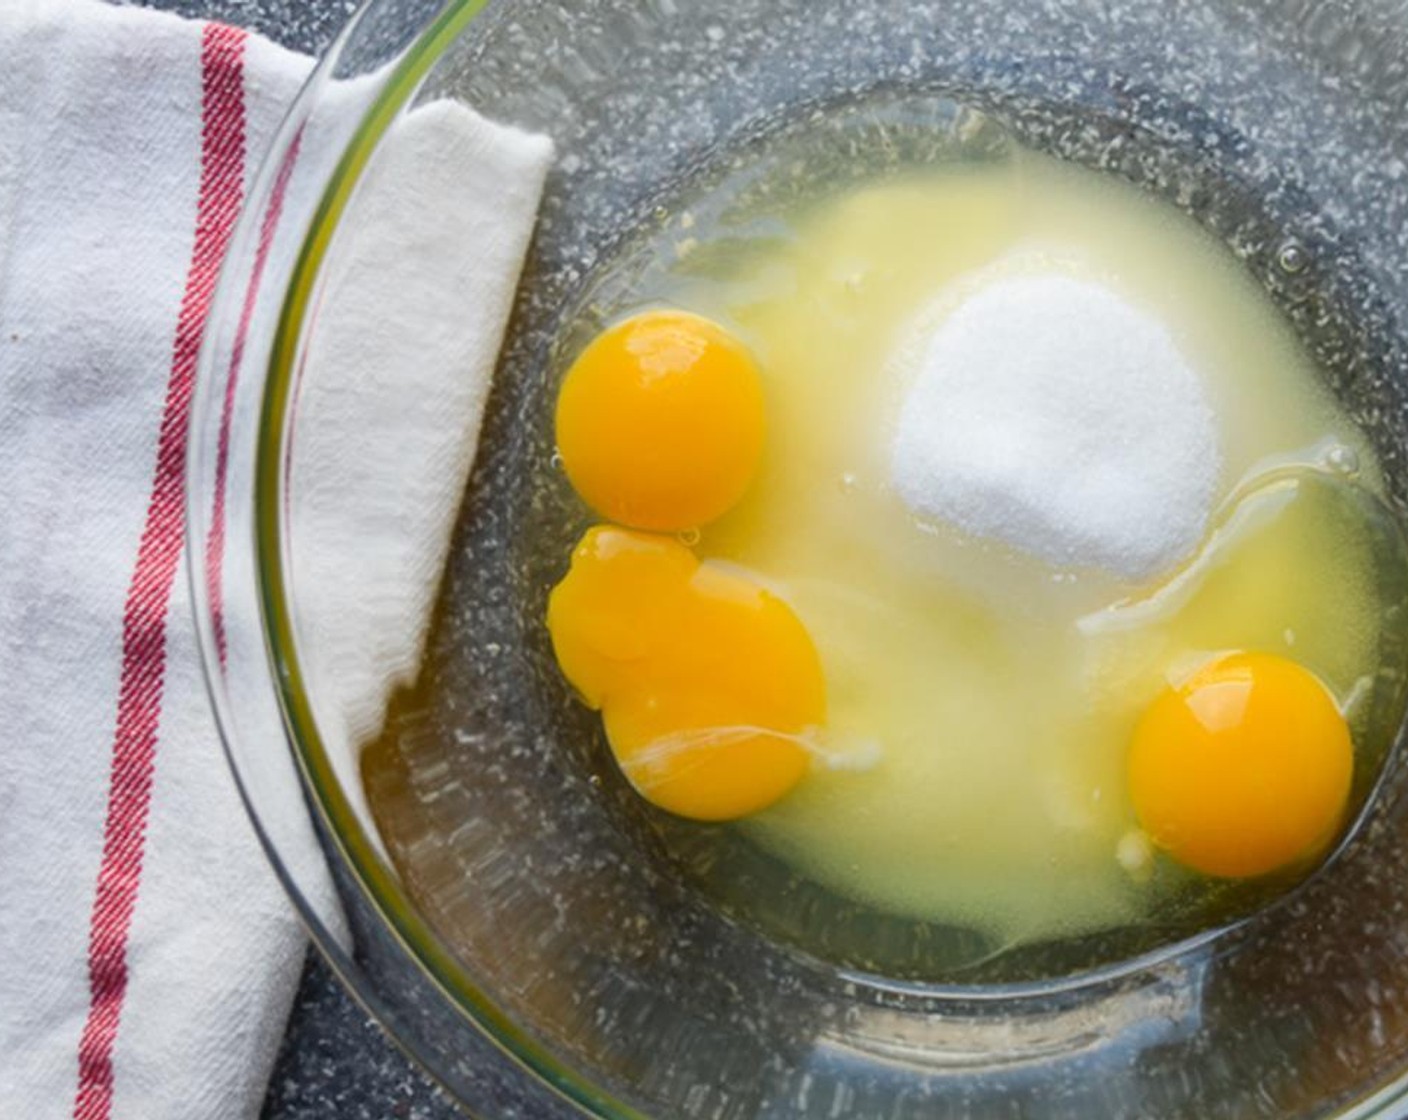 step 2 In a large bowl combine the Granulated Sugar (1 cup) and Farmhouse Eggs® Large Brown Eggs (3). Beat for 2 to 3 minutes until thick and pale yellow.